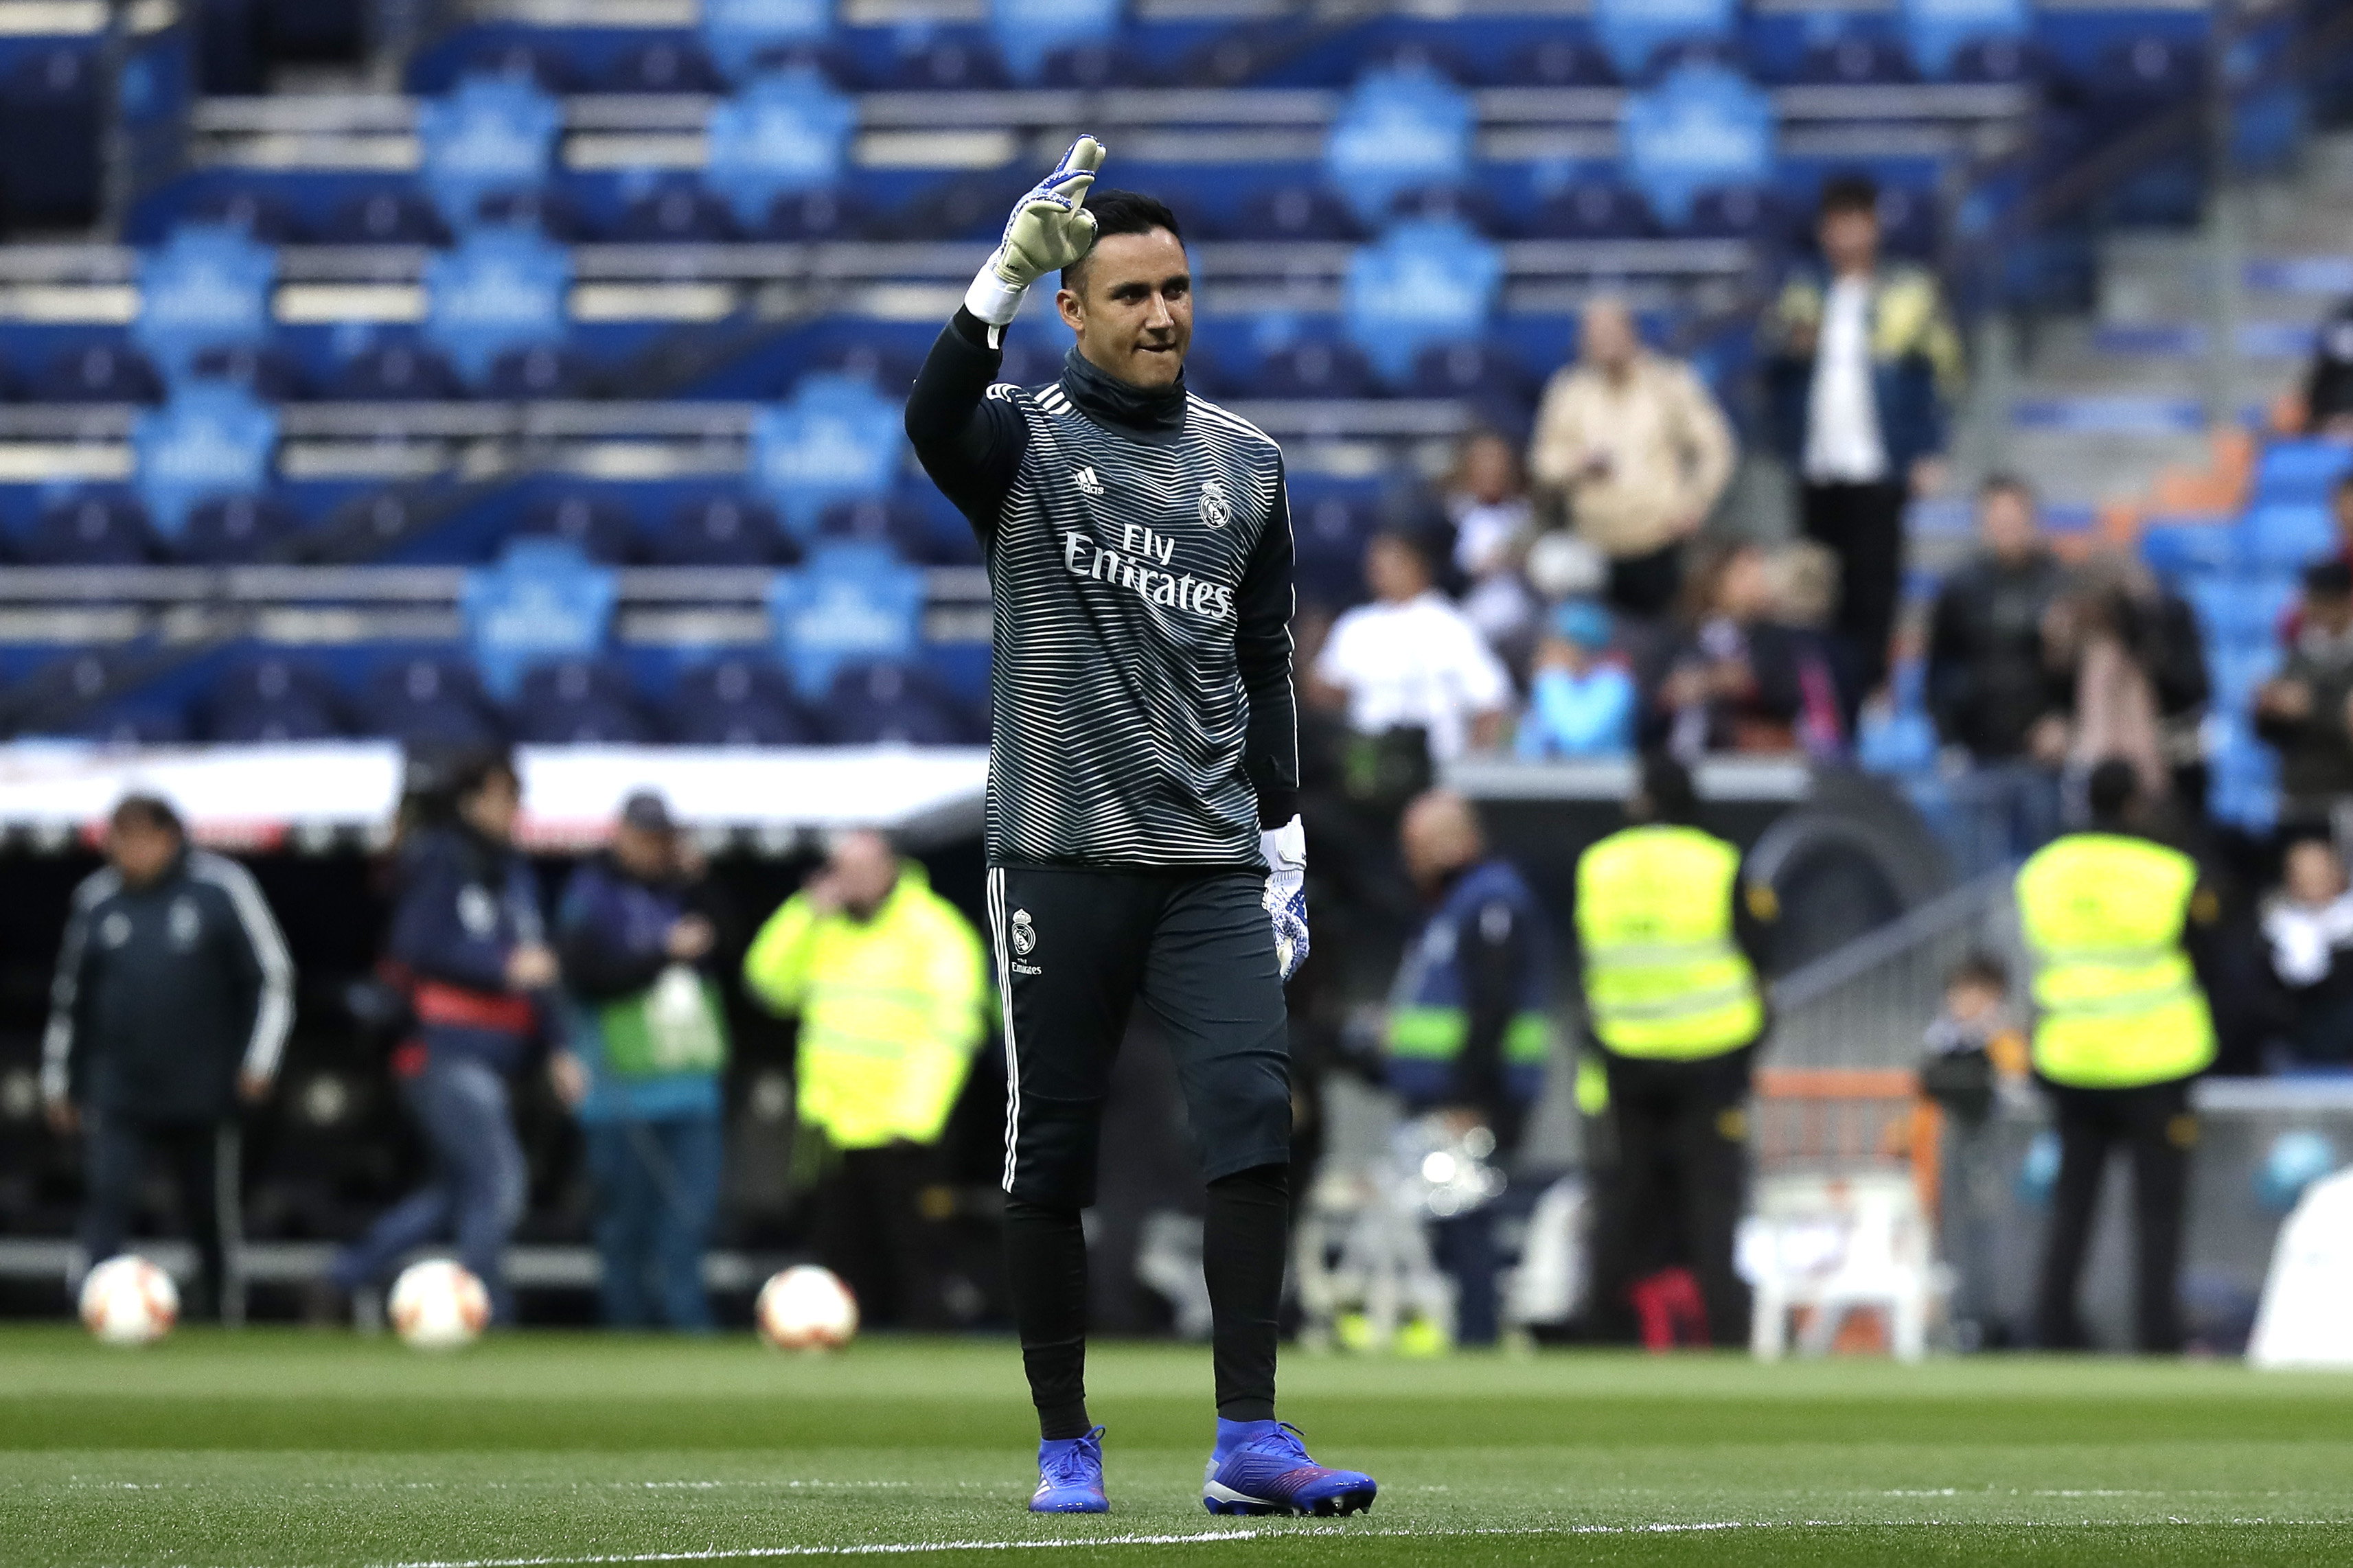 MADRID, SPAIN - MARCH 31:  Keylor Navas of Real Madrid waves to fans during the warm up ahead of the La Liga match between Real Madrid CF and SD Huesca at Estadio Santiago Bernabeu on March 31, 2019 in Madrid, Spain. (Photo by Gonzalo Arroyo Moreno/Getty Images)